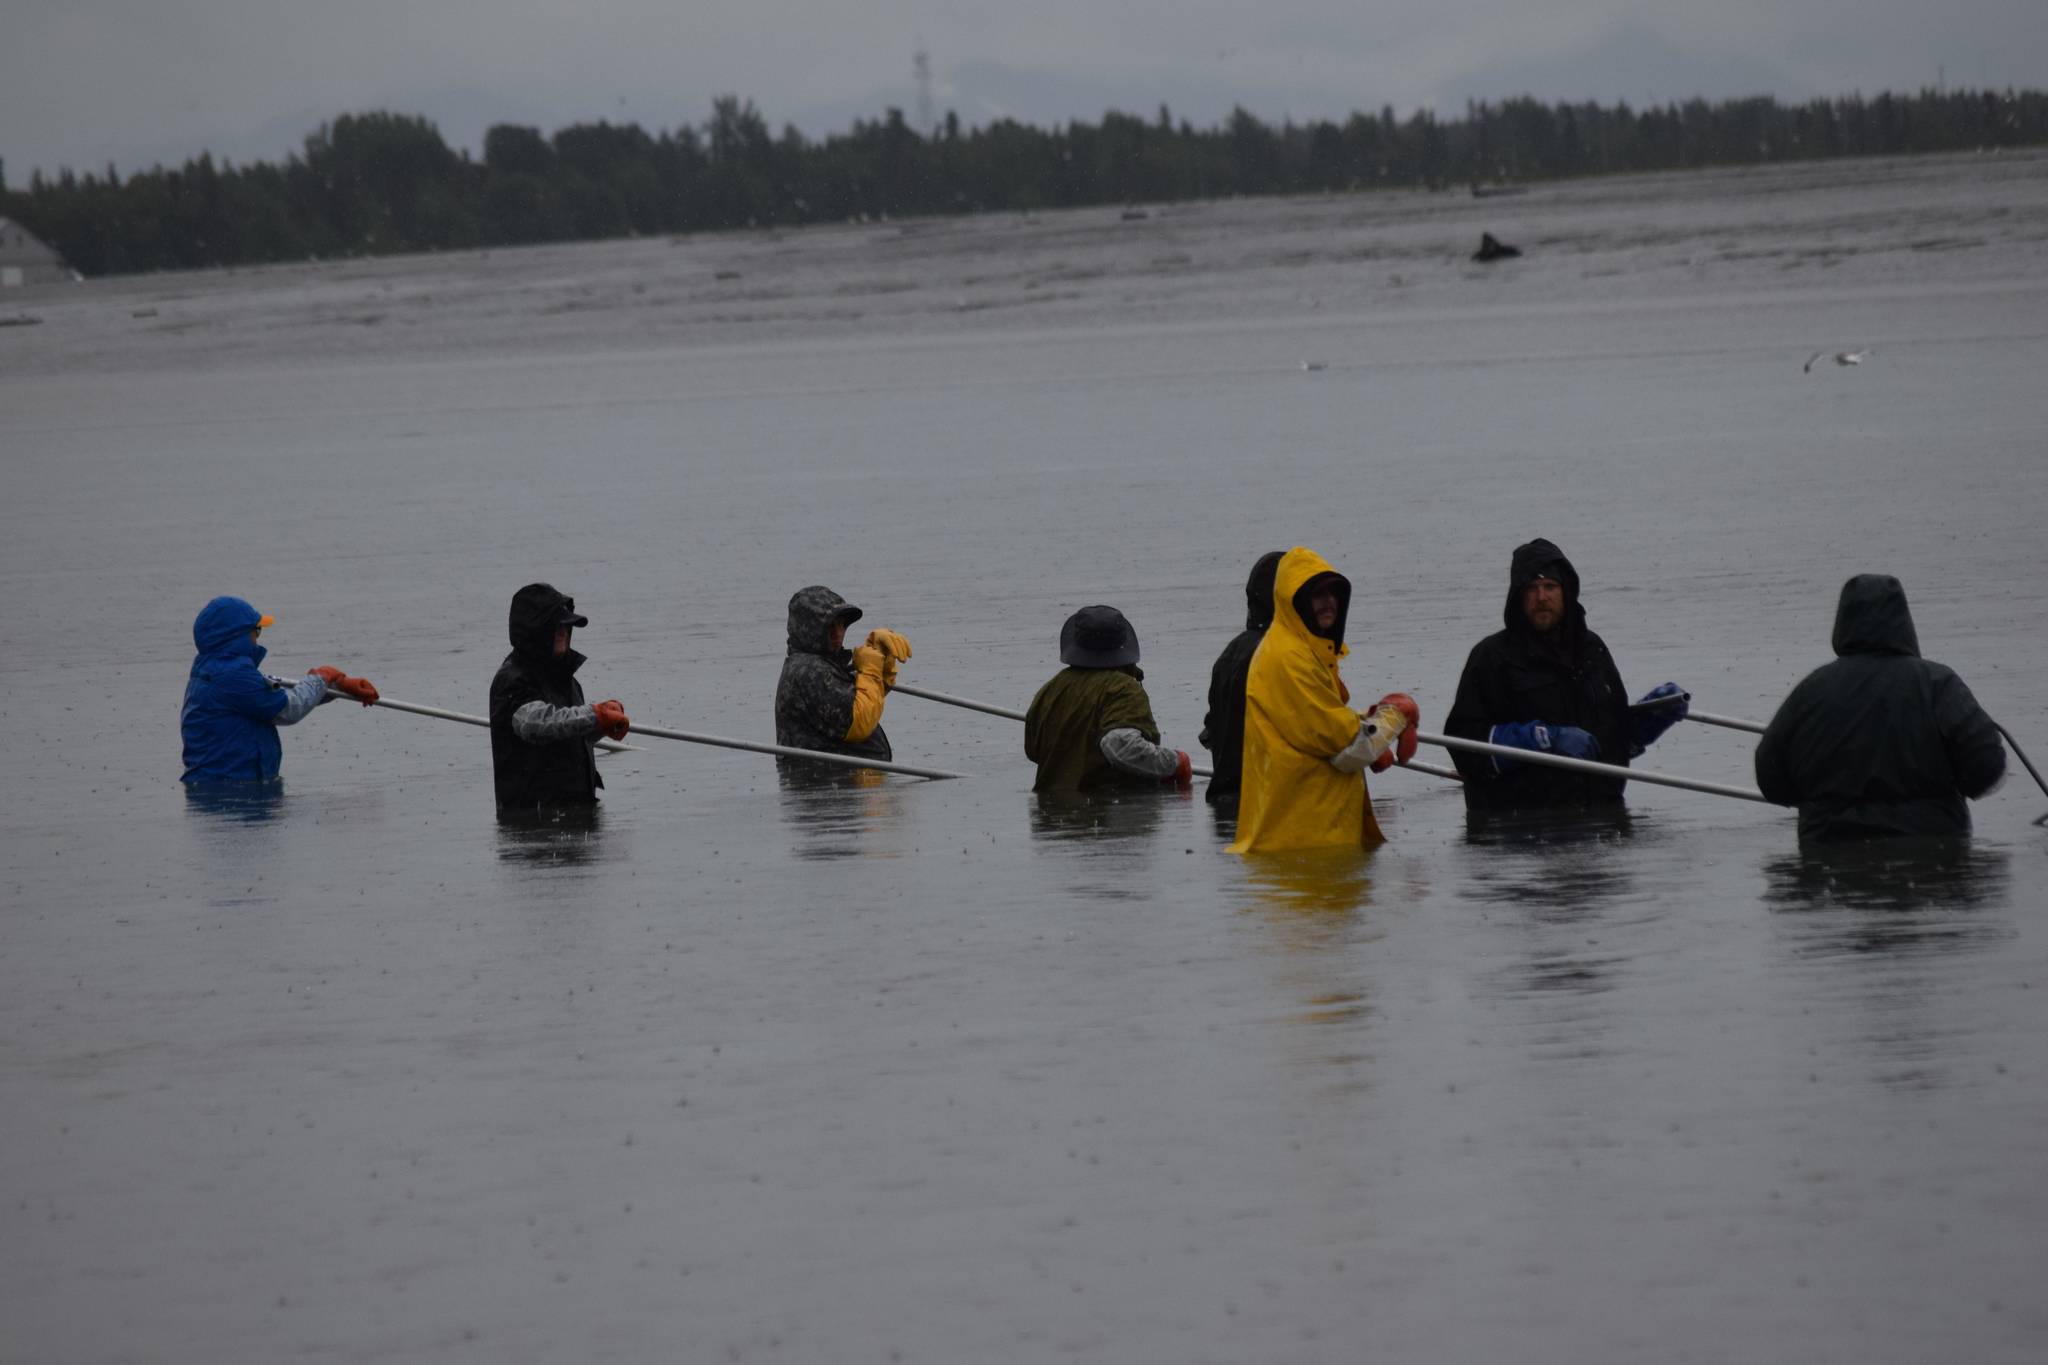 Dipnetters make a line in the waters off North Kenai Beach on Saturday, July 10, 2021. (Camille Botello / Peninsula Clarion)